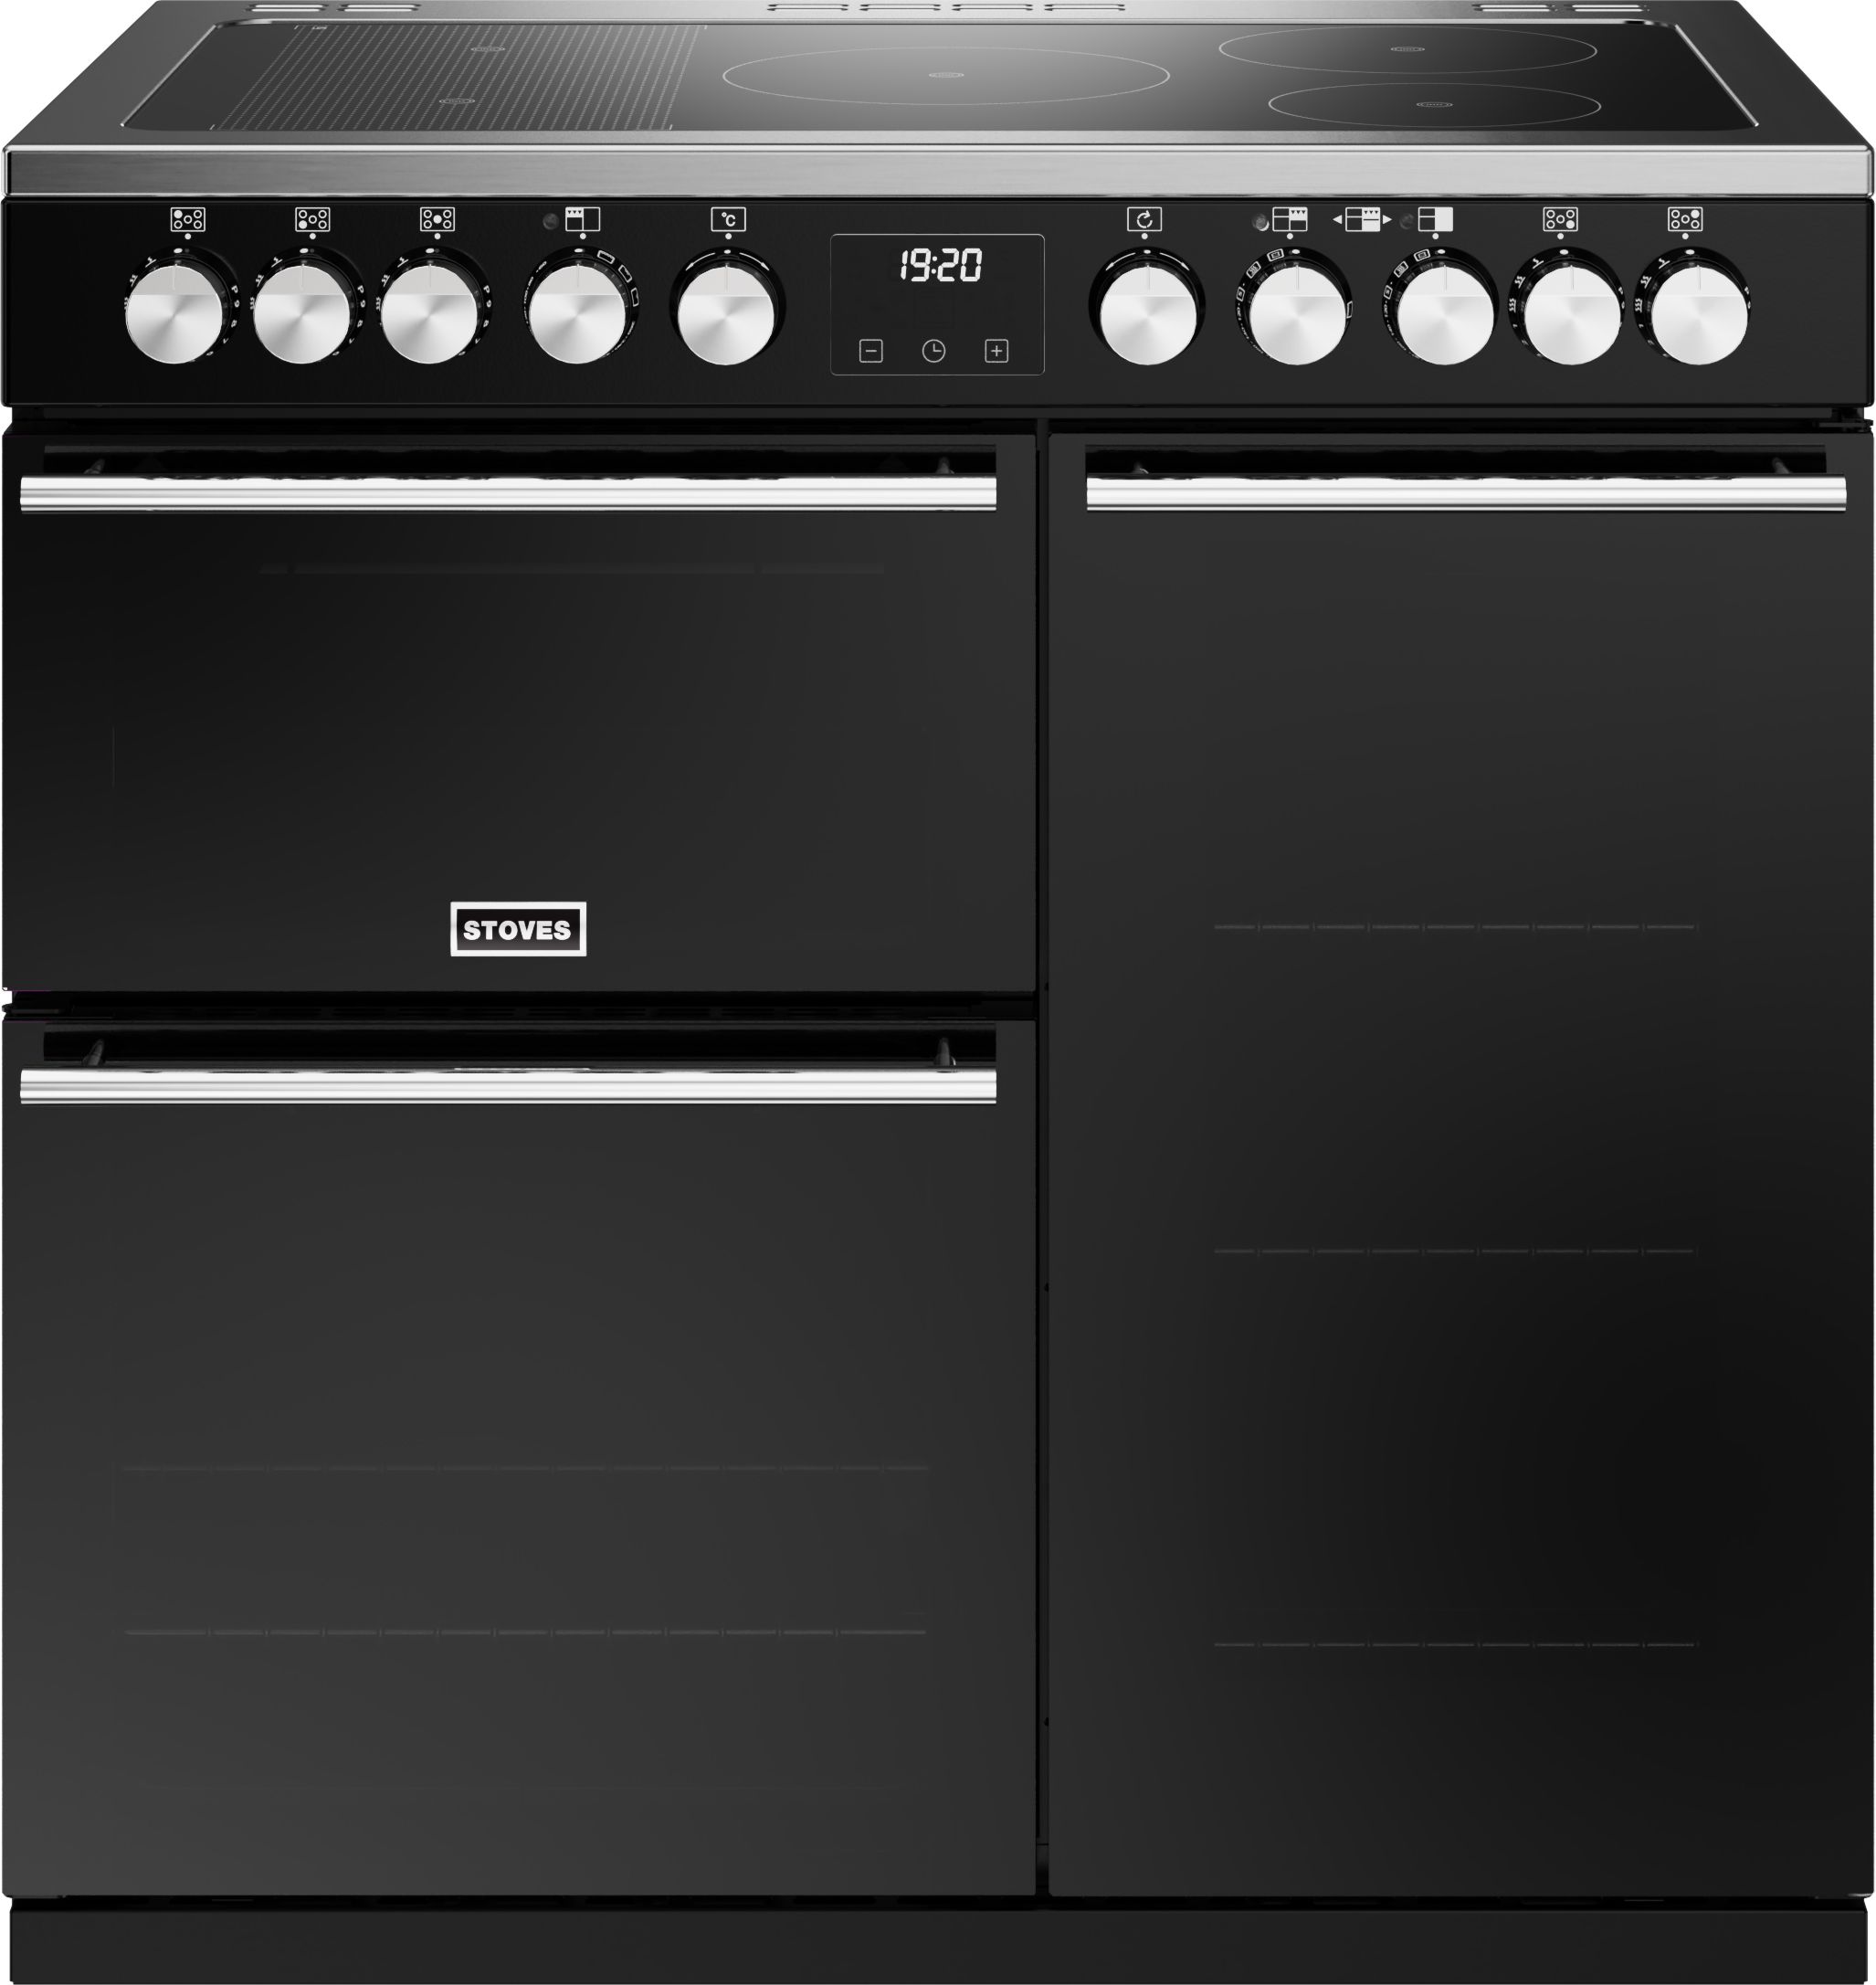 Stoves Precision Deluxe ST DX PREC D900Ei RTY BK 90cm Electric Range Cooker with Induction Hob - Black - A Rated, Black